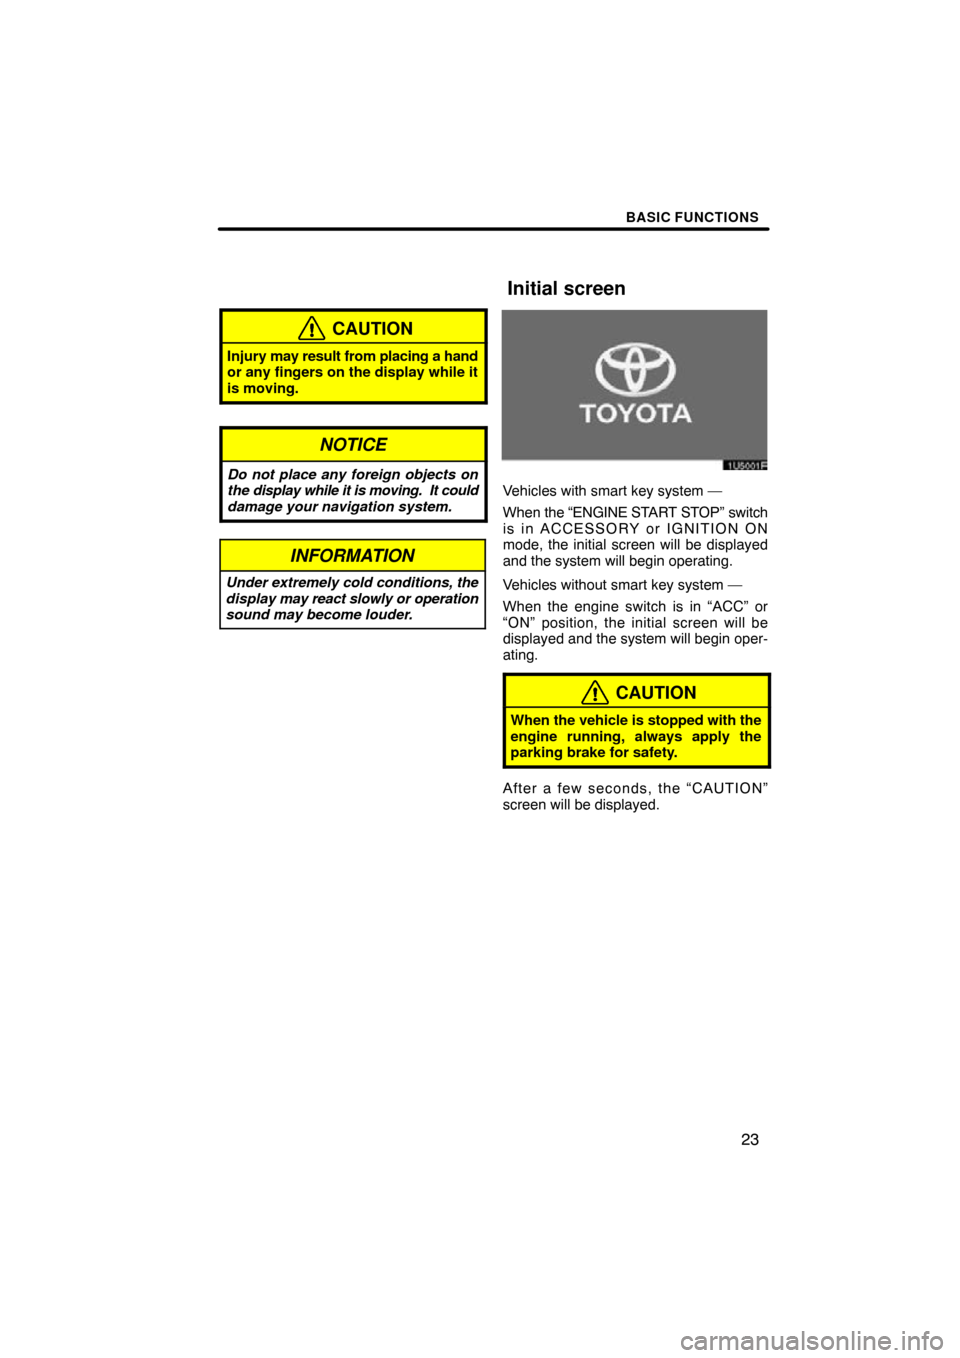 TOYOTA RAV4 2009 XA30 / 3.G Navigation Manual BASIC FUNCTIONS
23
CAUTION
Injury may result from placing a hand
or any fingers on the display while it
is moving.
NOTICE
Do not place any foreign objects on
the display while it is moving.  It could
